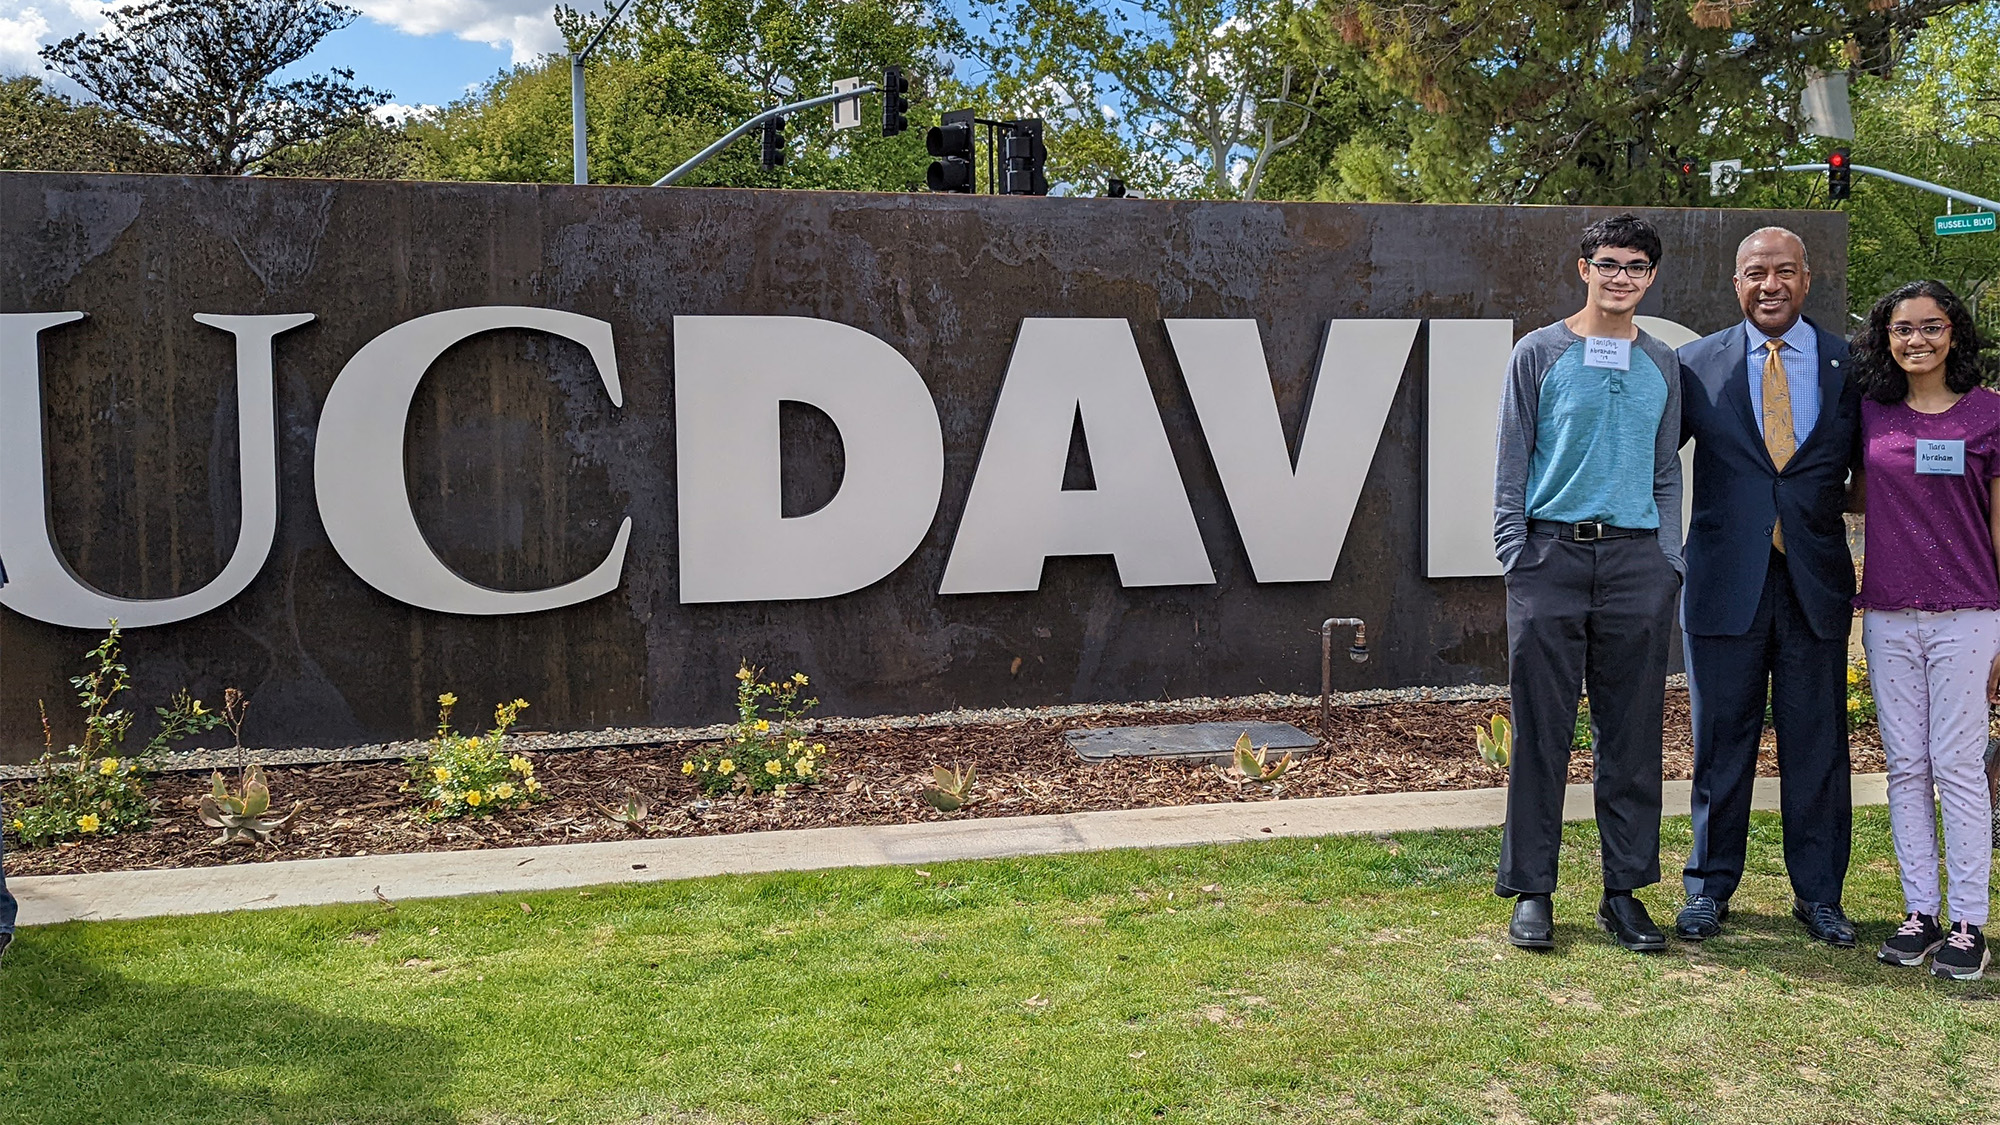 Tanishq Abraham and Tiara Abraham pose for a photo with Chancellor Gary S. May at the new UC Davis sign.